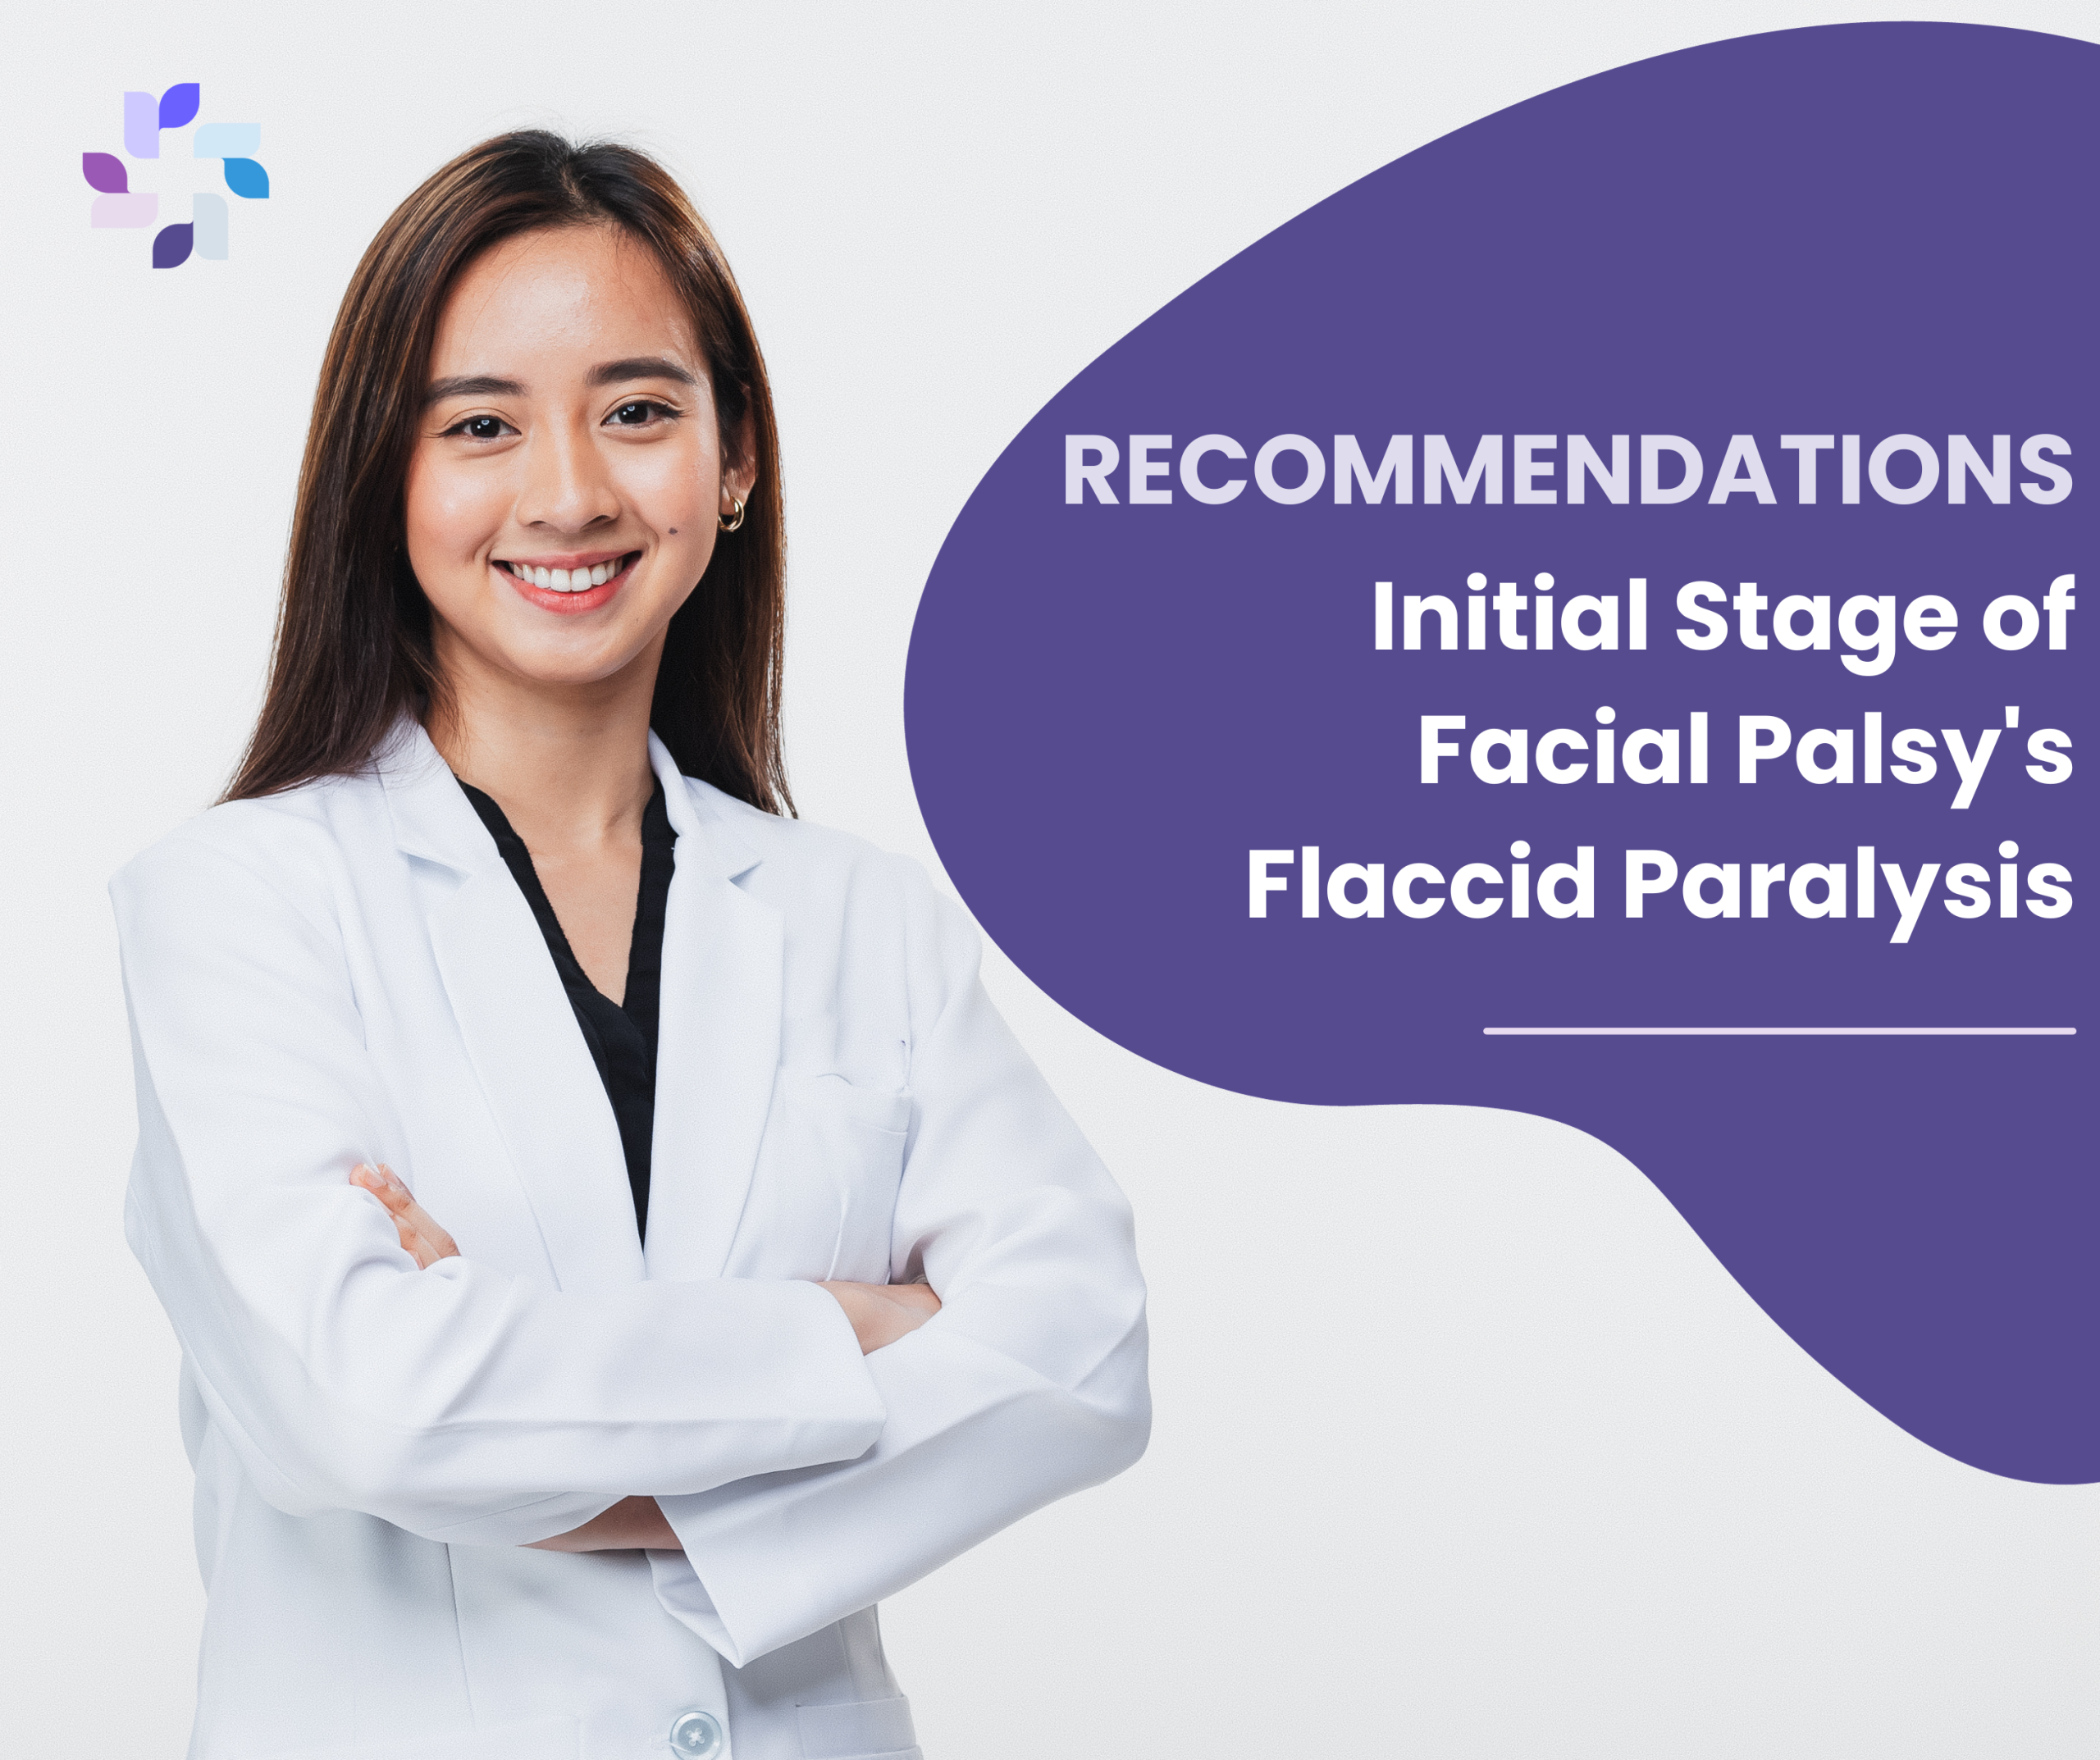 Recommendations for Managing Initial Stage of Facial Palsy's Flaccid Paralysis